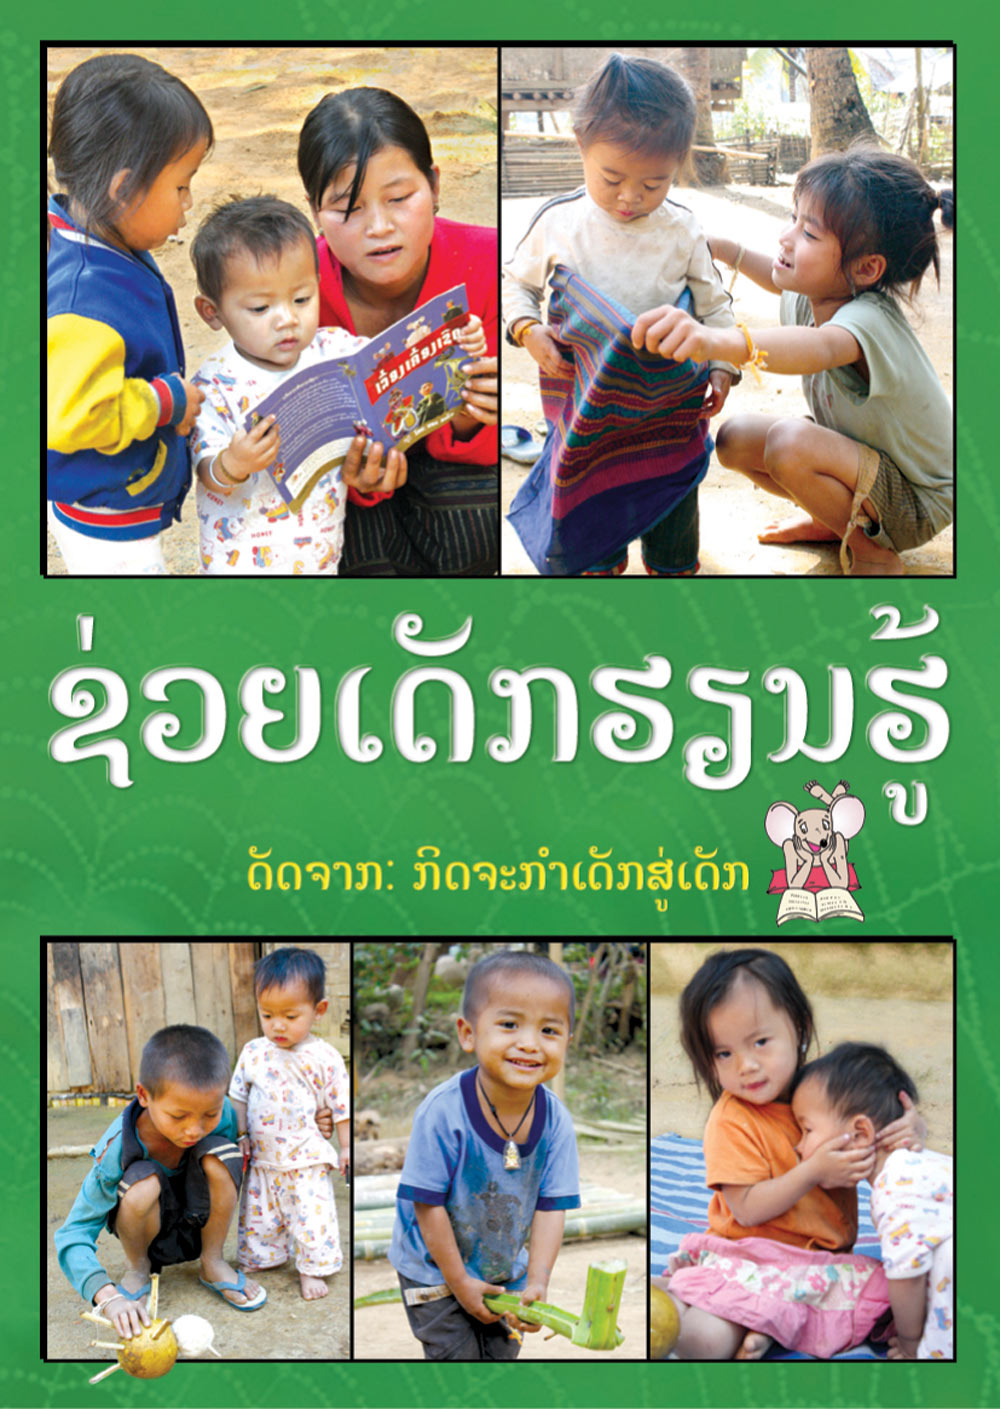 Helping Children Learn large book cover, published in Lao language